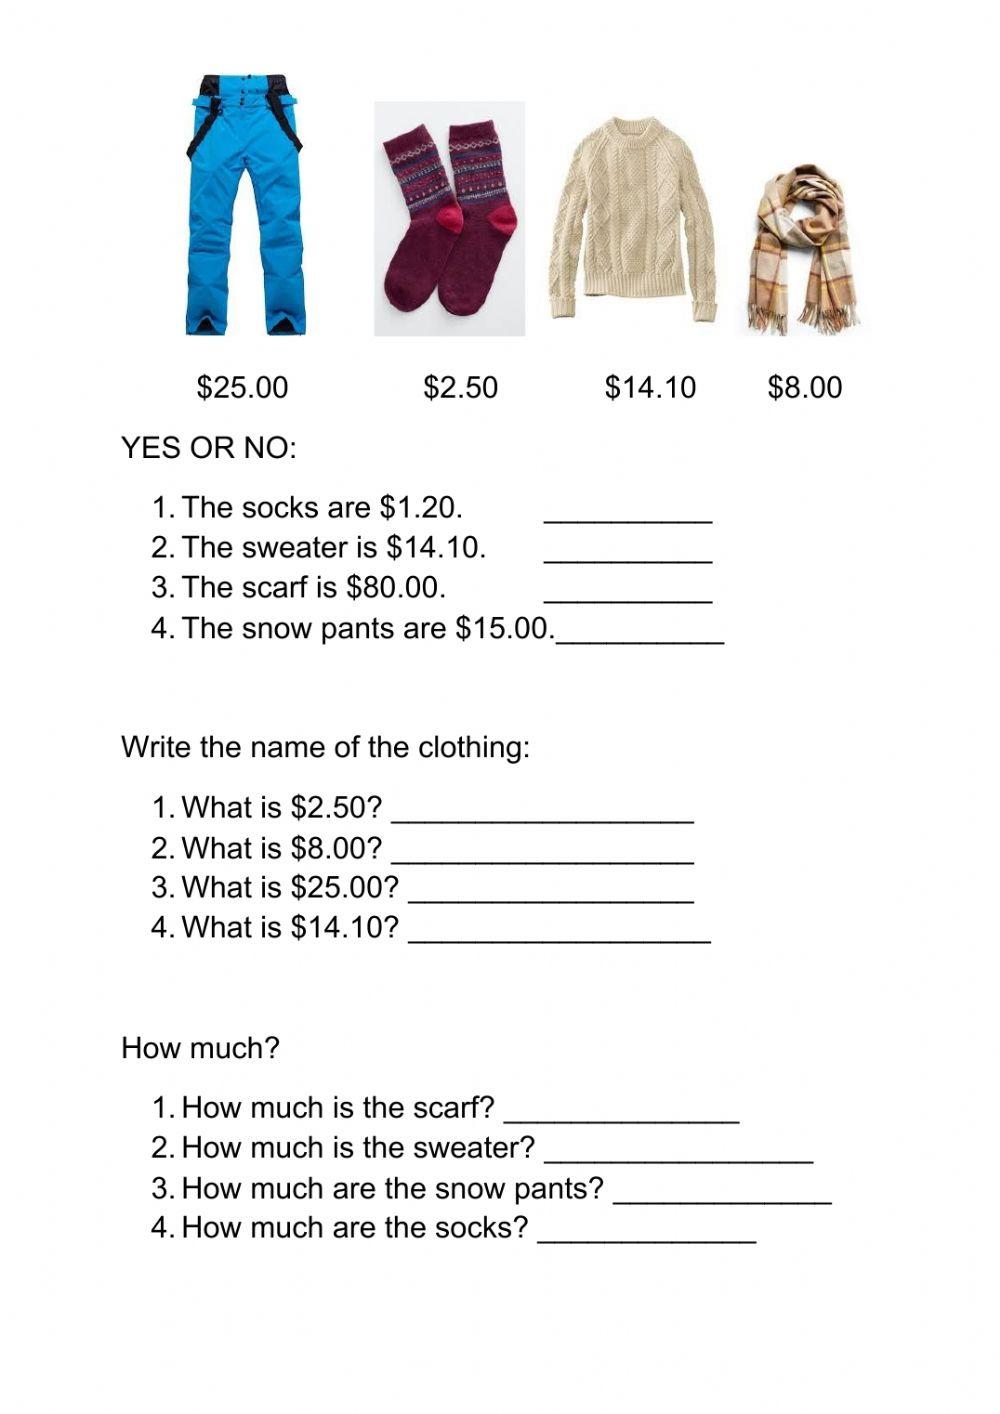 Winter clothes and prices